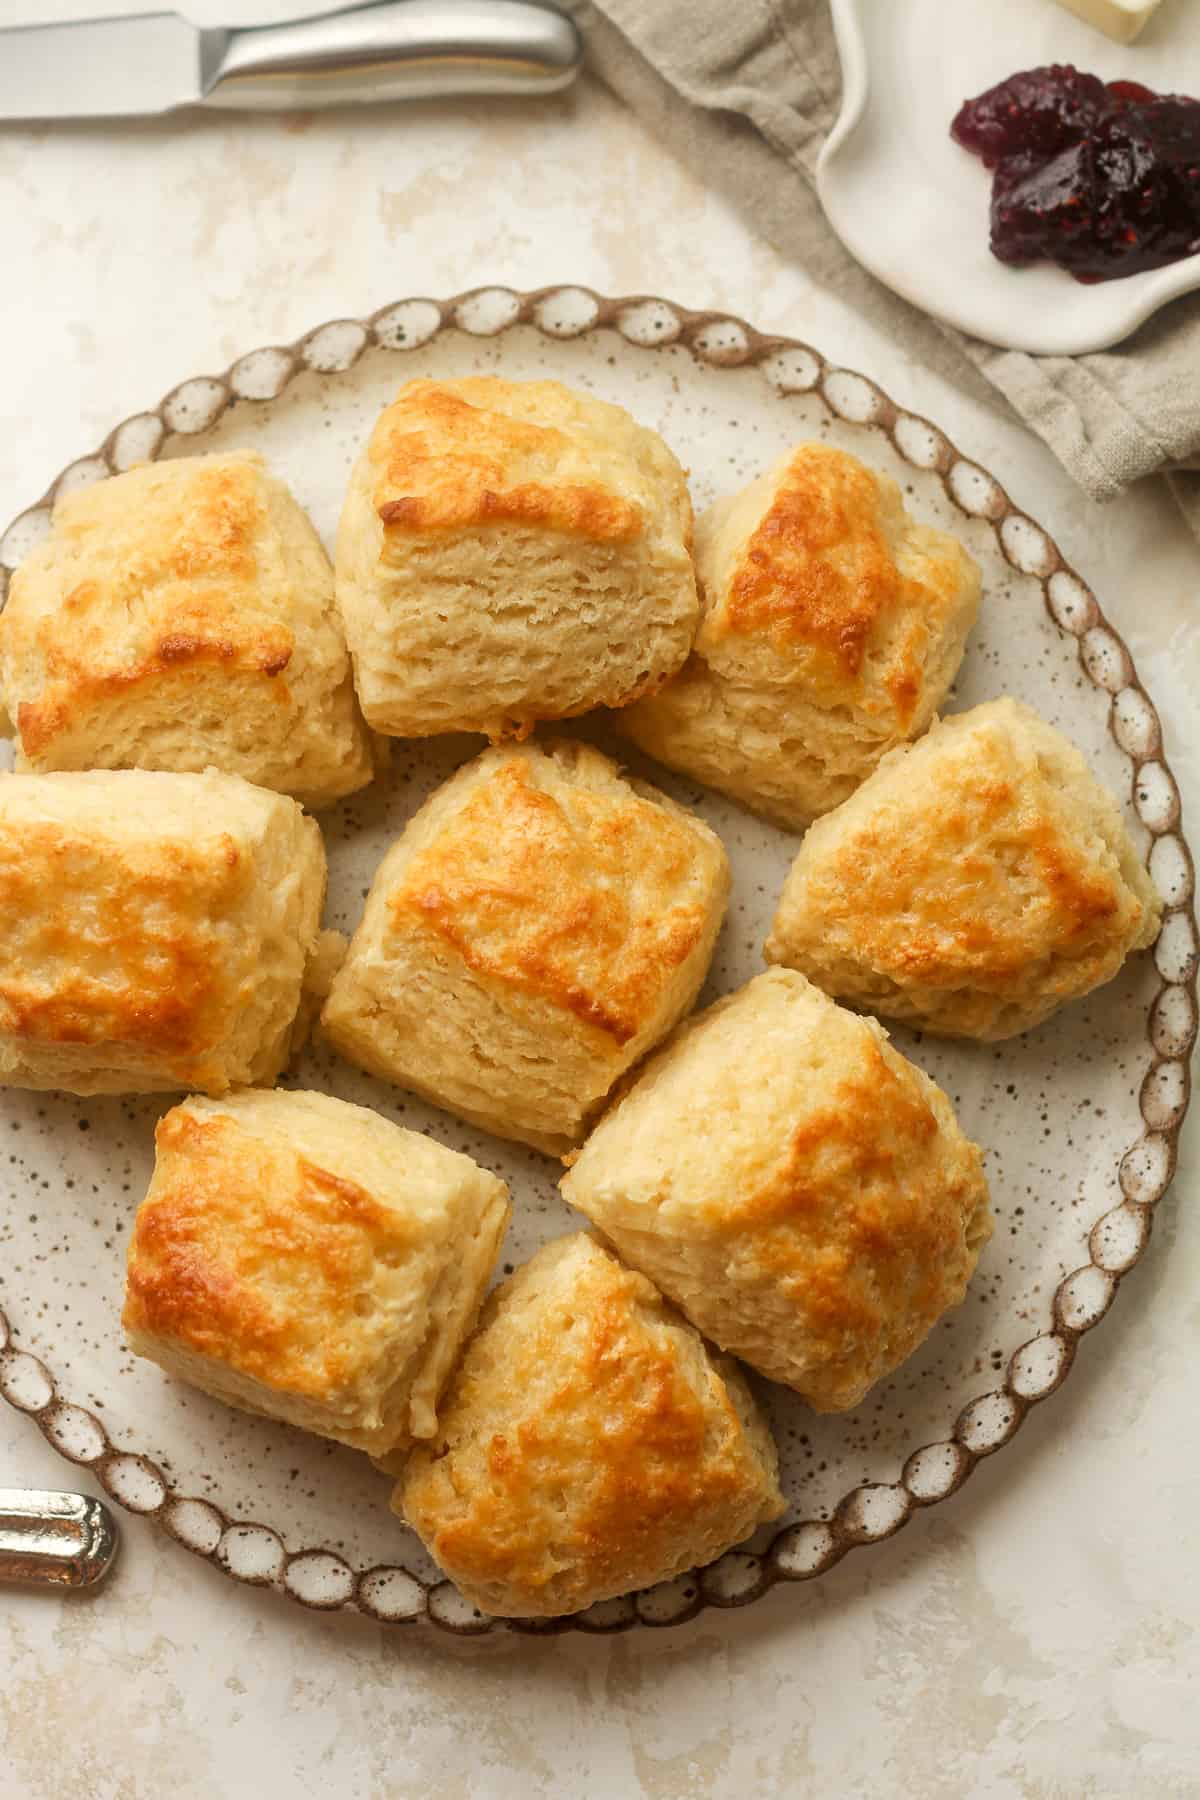 Overhead view of a plate of buttermilk biscuits.